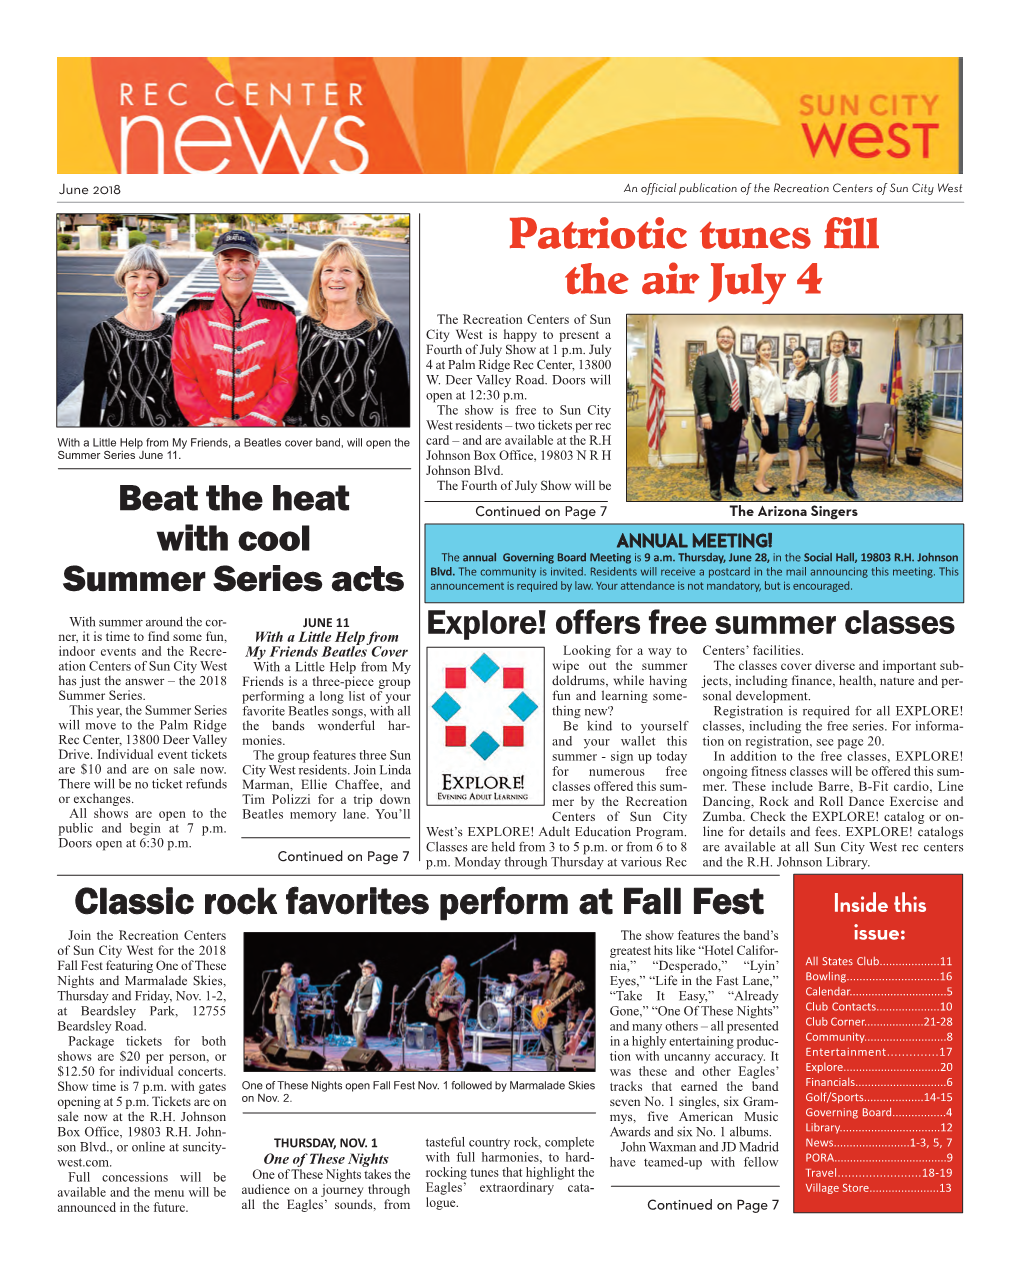 Patriotic Tunes Fill the Air July 4 the Recreation Centers of Sun City West Is Happy to Present a Fourth of July Show at 1 P.M